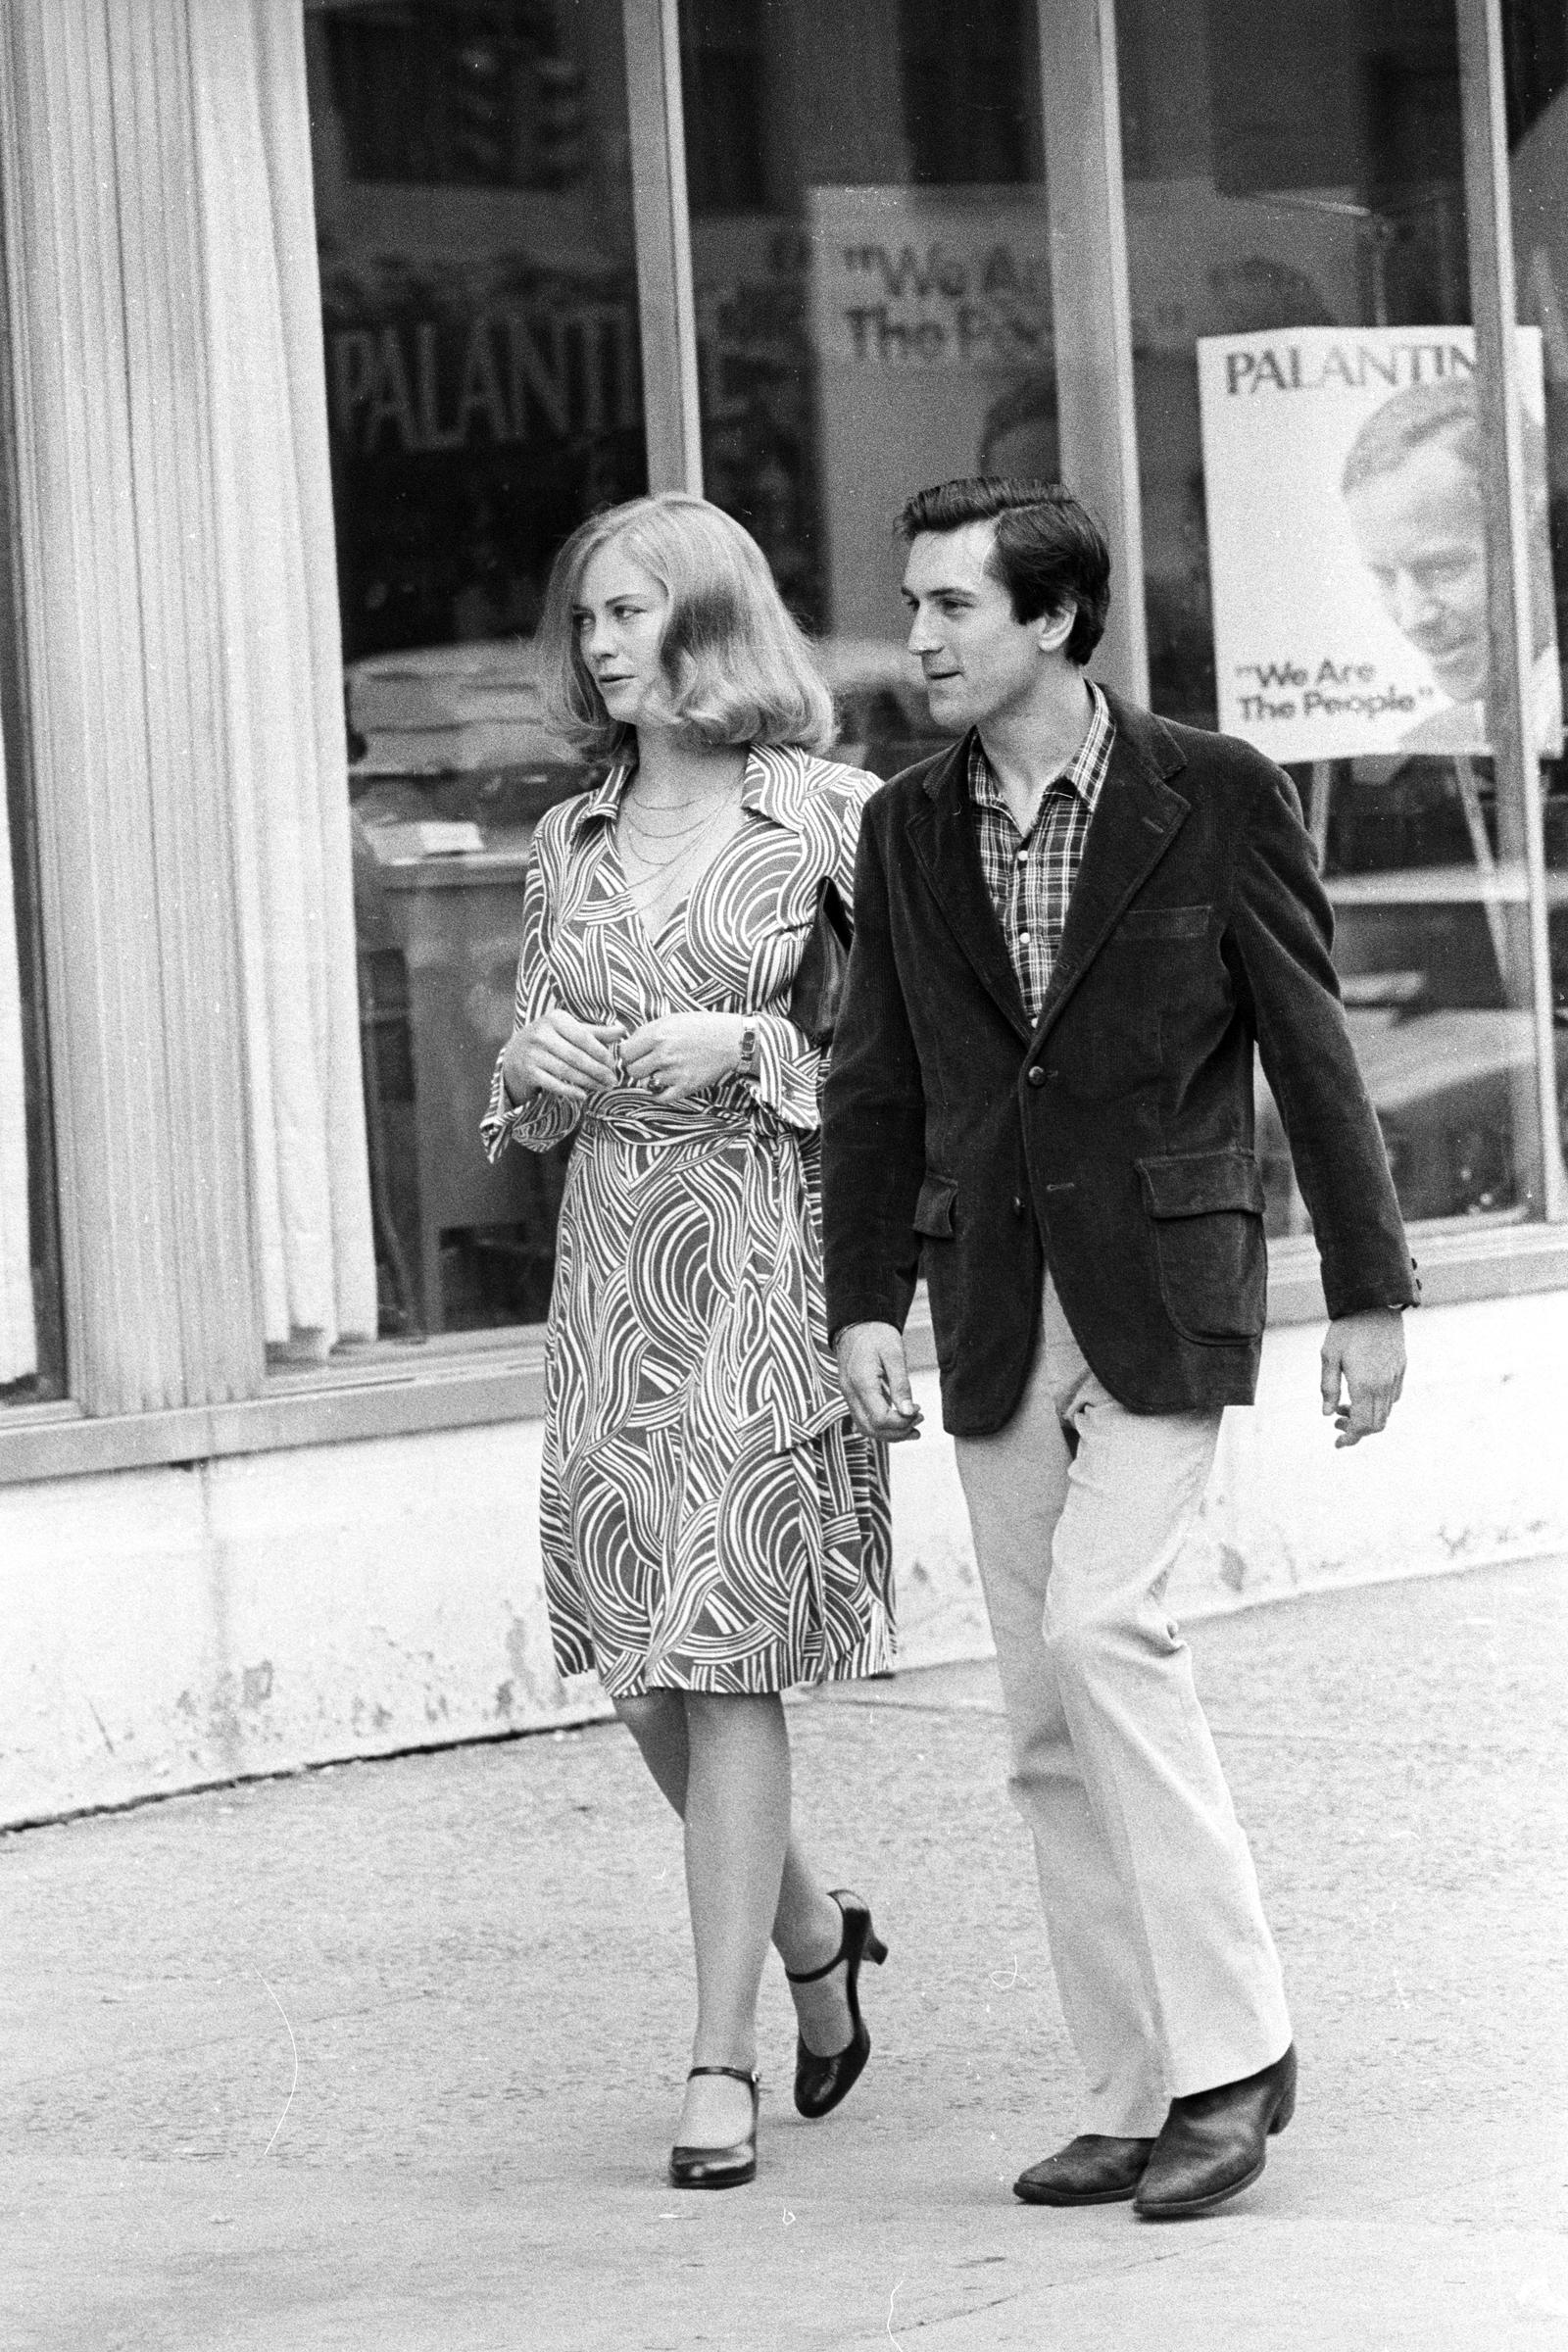 Cybill Shepherd and Robert De Niro filming "Taxi Driver" on June 17, 1975, in New York. | Source: Getty Images